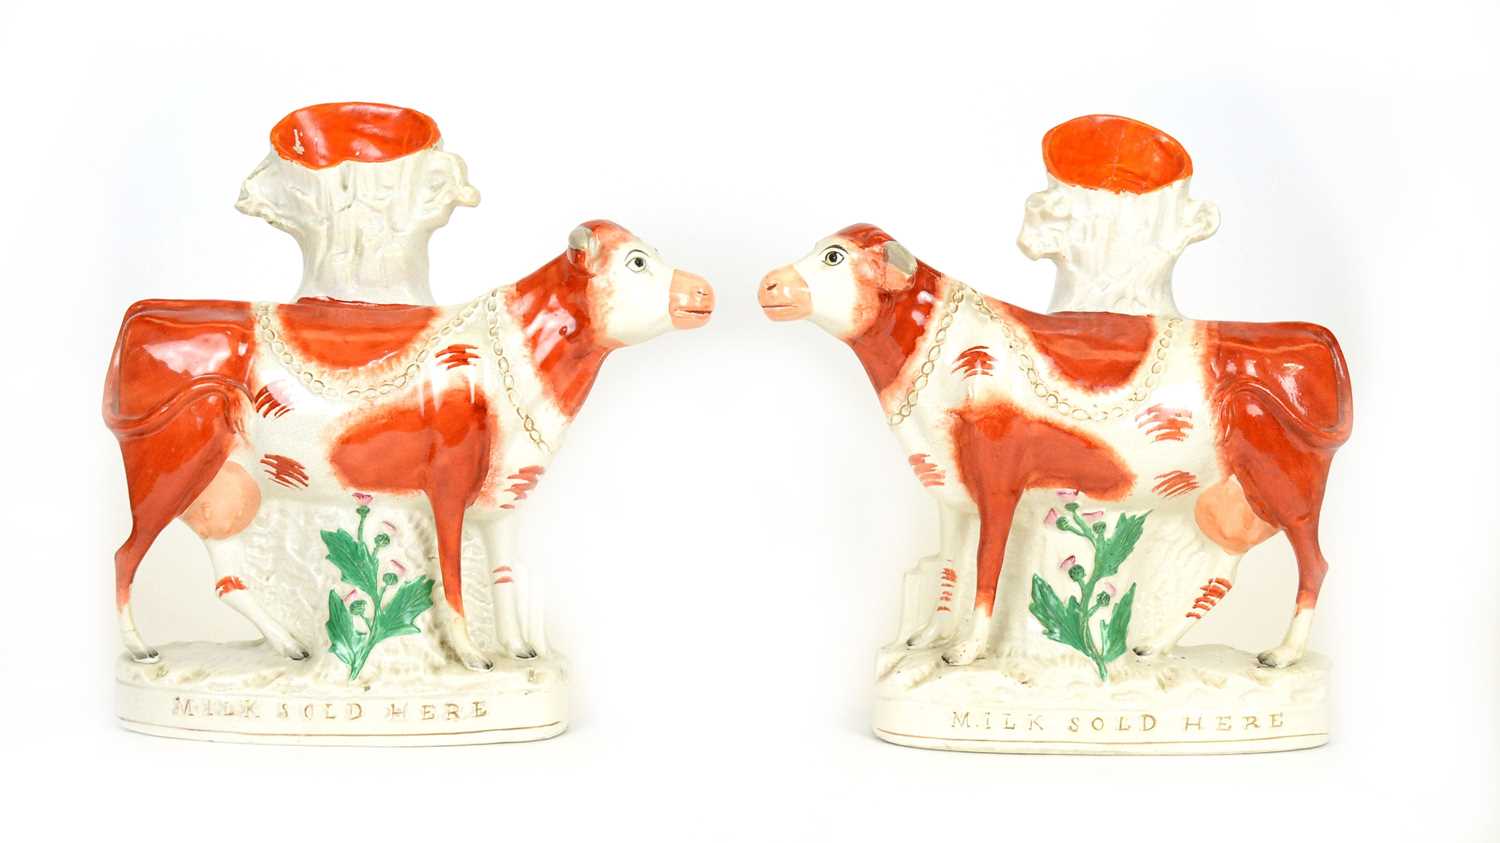 Pair of Staffordshire 'MILK SOLD HERE' cows